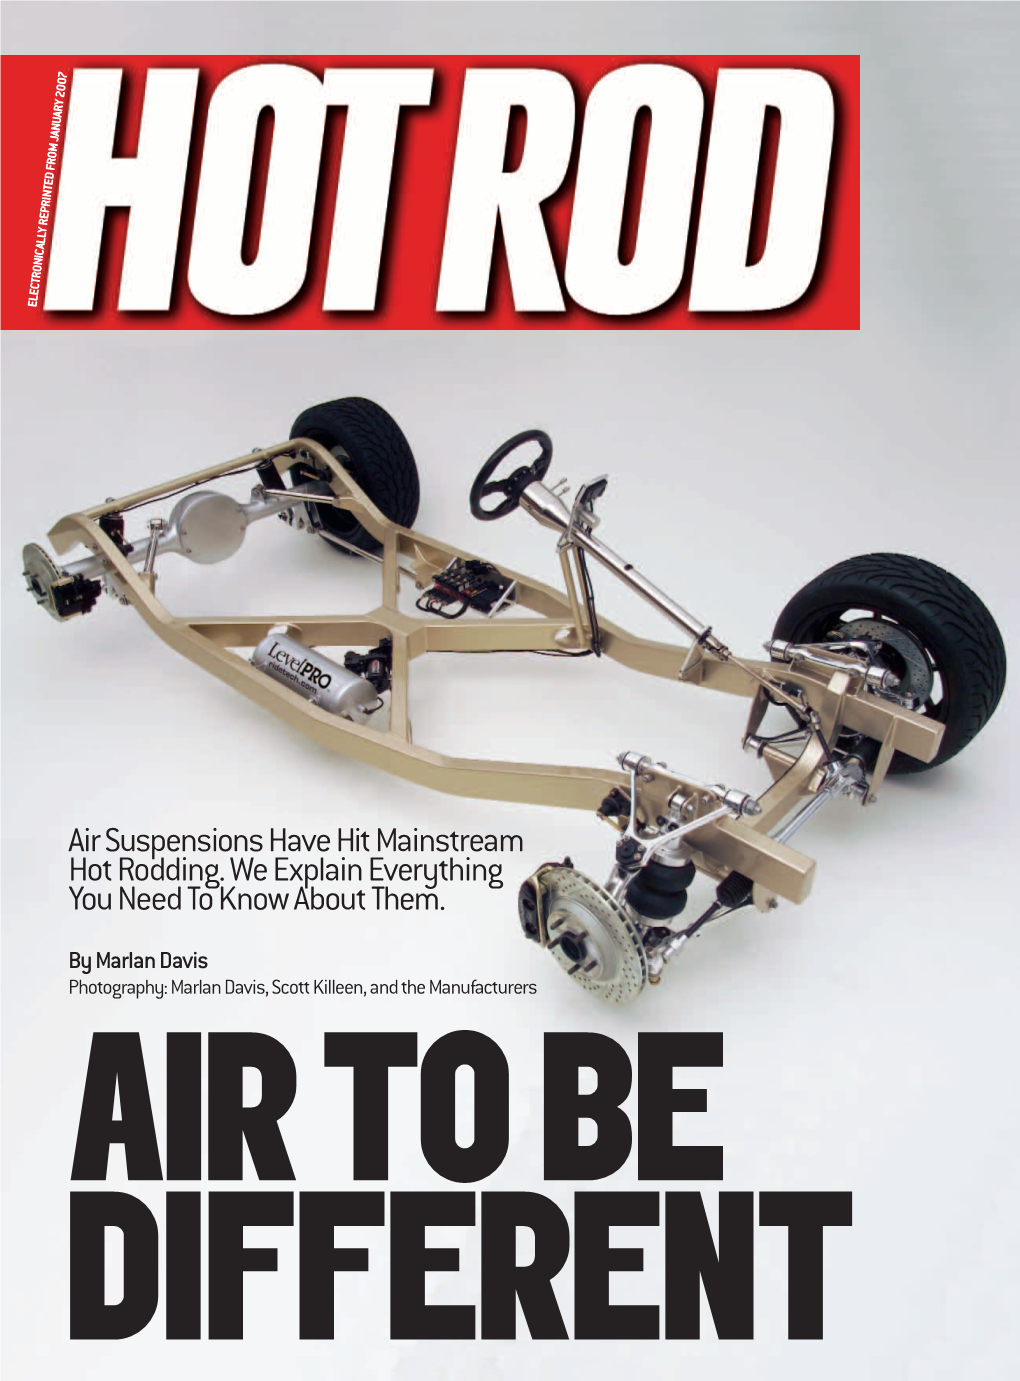 Air Suspensions Have Hit Mainstream Hot Rodding. We Explain Everything You Need to Know About Them